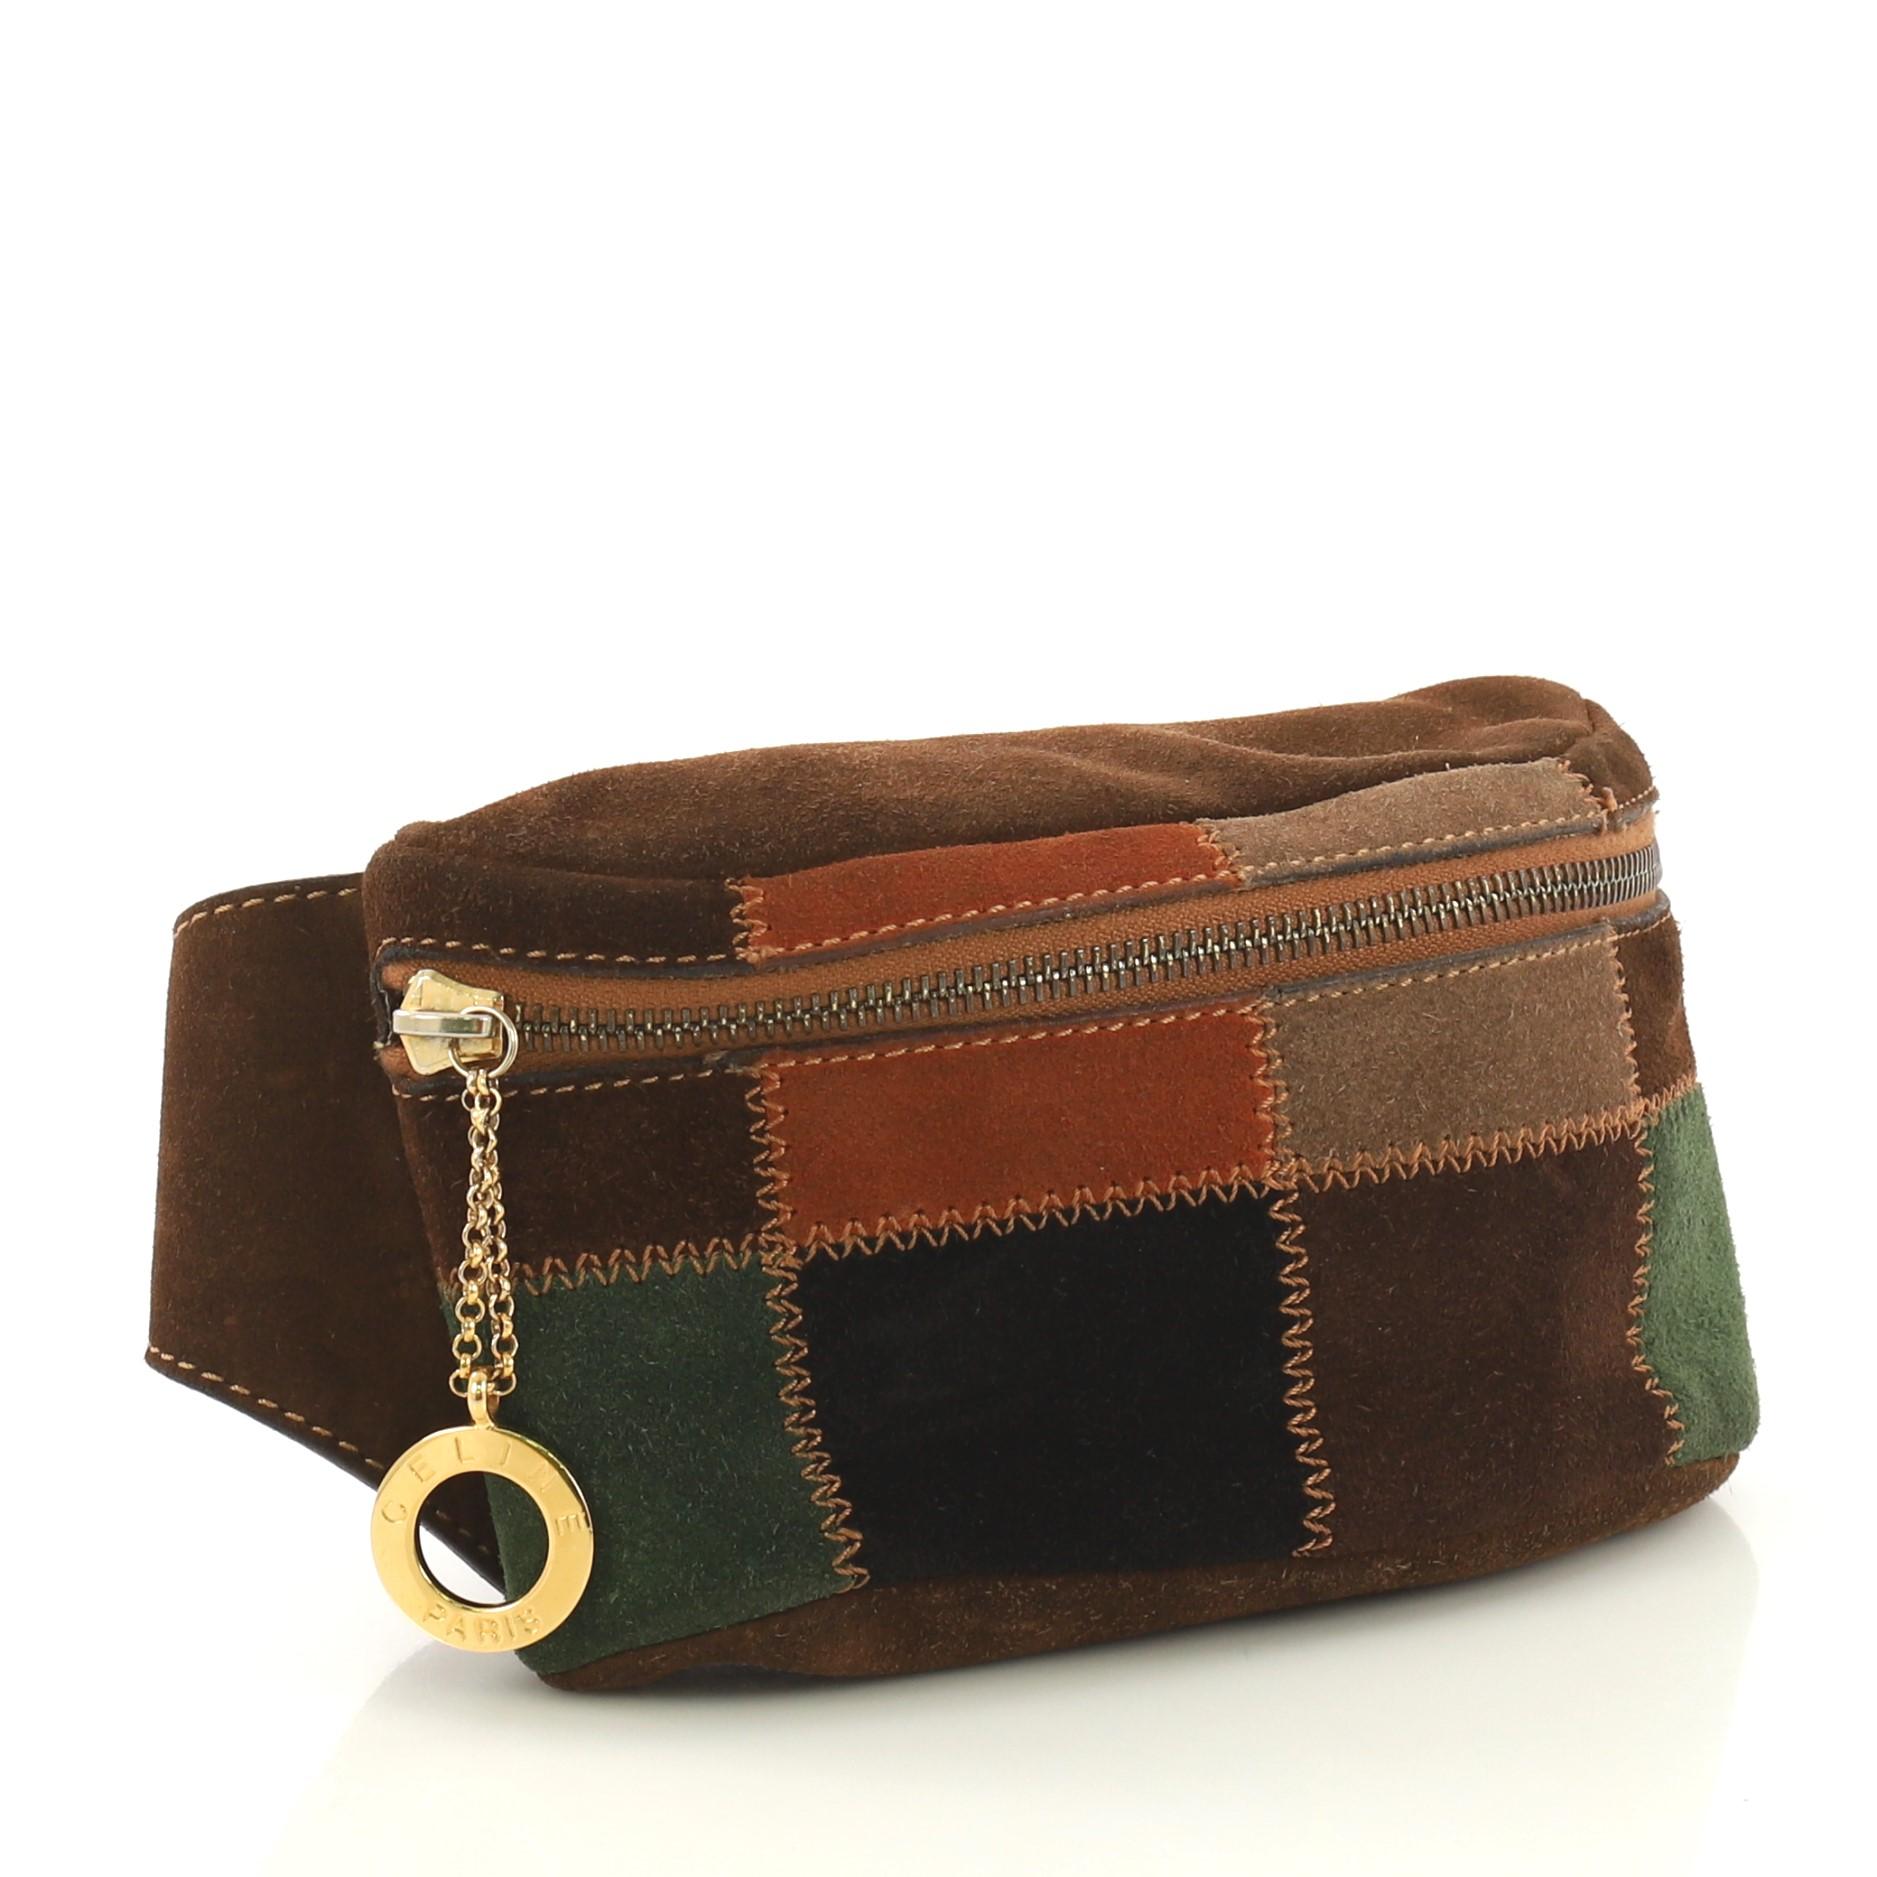 This Celine Vintage Waist Bag Patchwork Suede, crafted in multicolor patchwork suede, features an adjustable strap and gold-tone hardware. Its zip closure opens to a brown leather interior .

Condition: Fair. Odor in interior. Moderate wear,